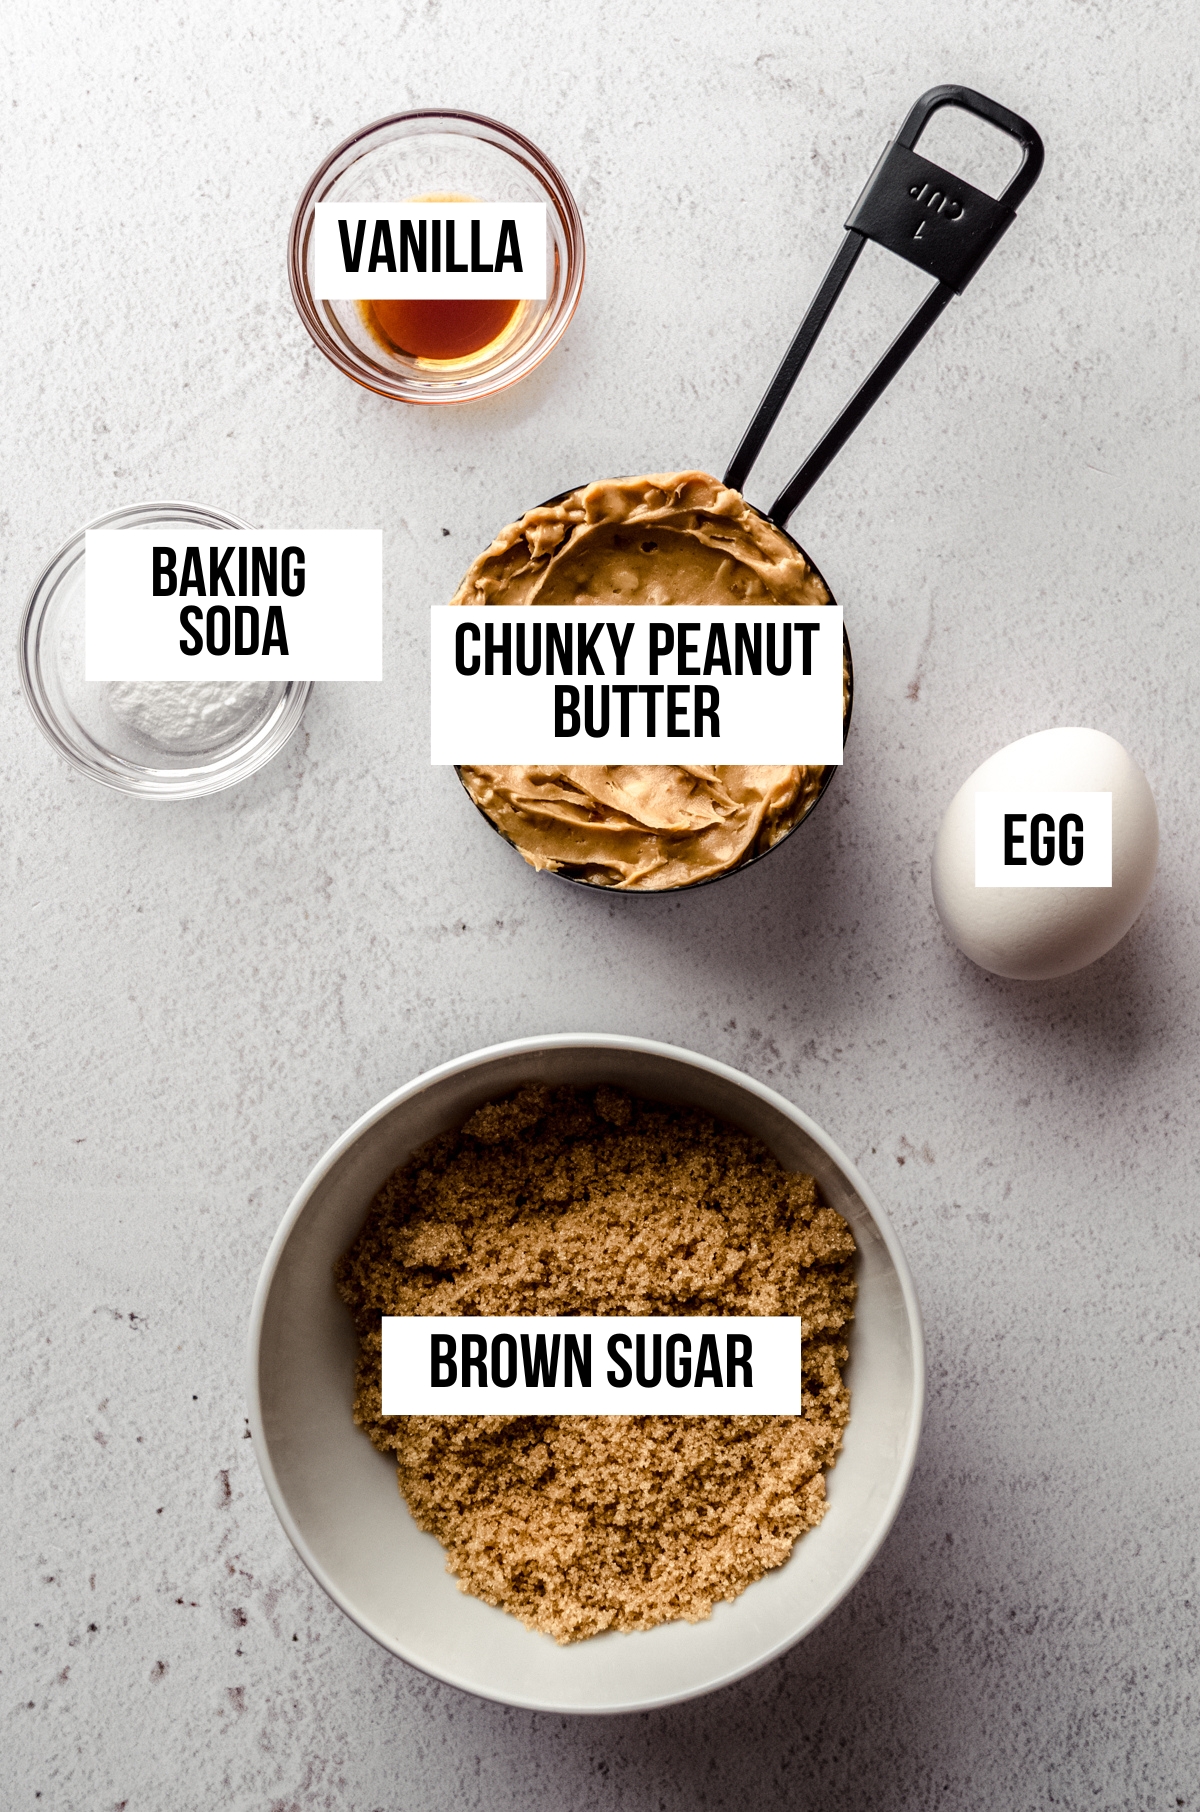 Aerial photo of ingredients to make flourless peanut butter cookies with text overlay labeling each ingredient.